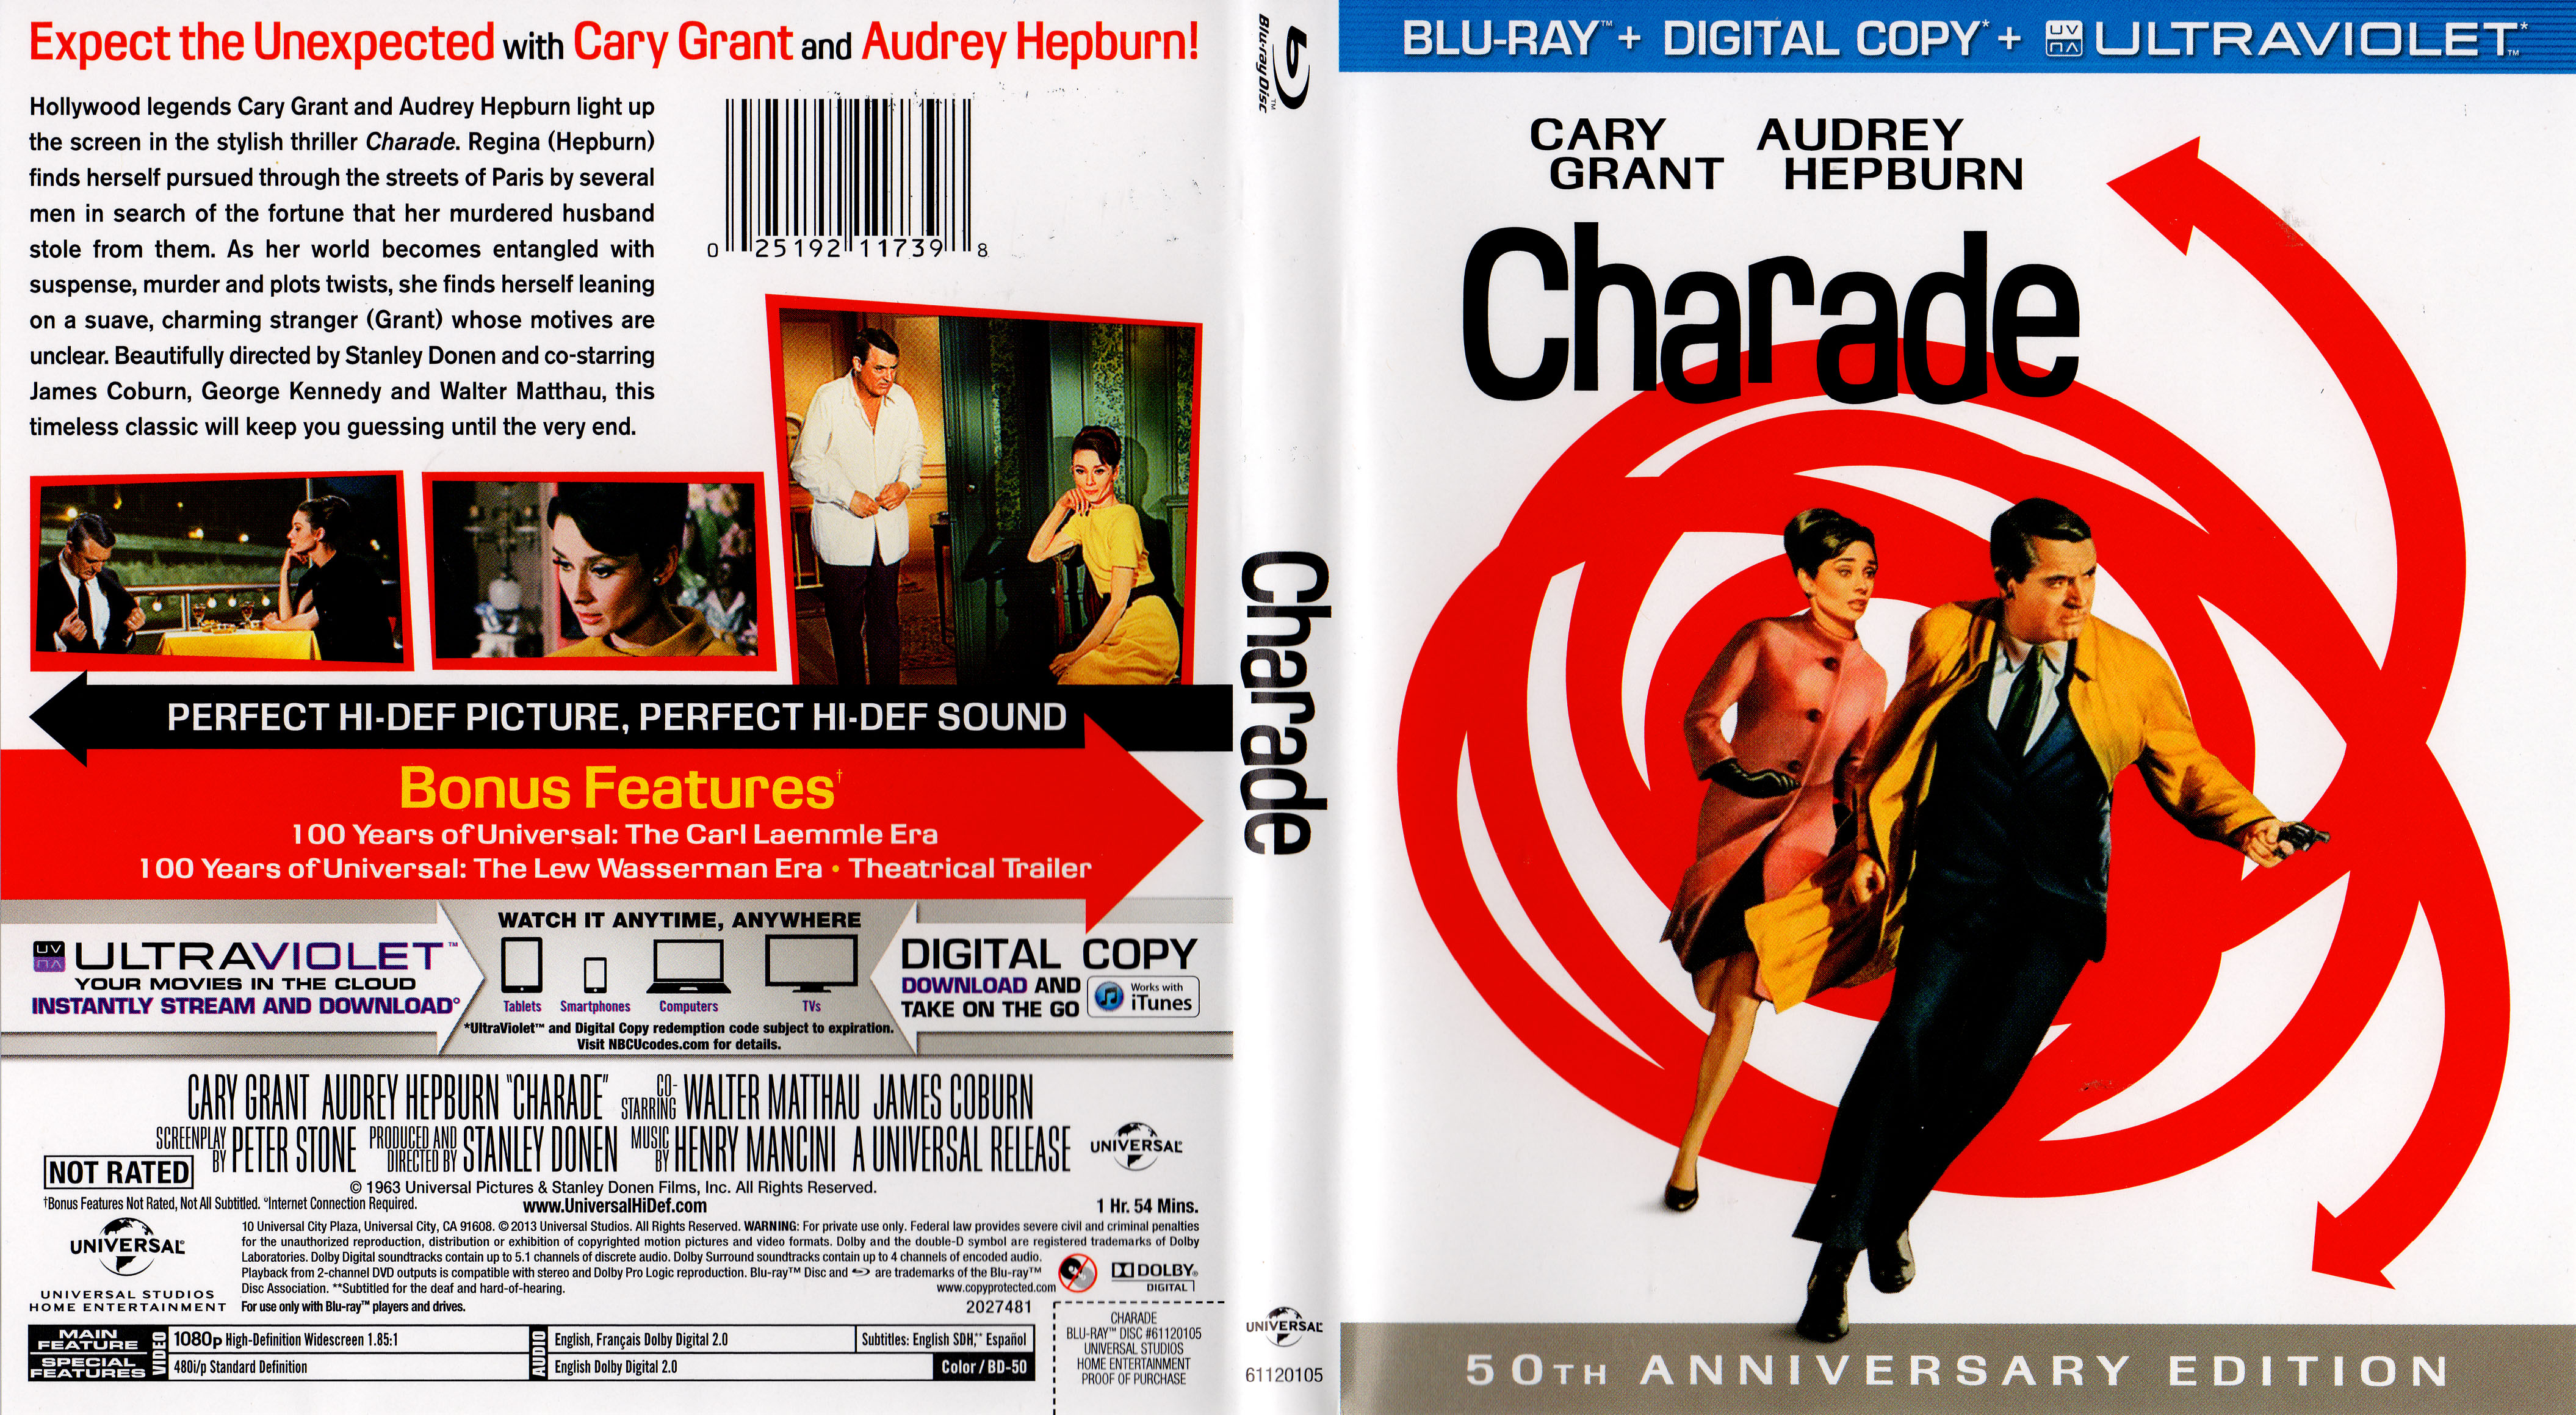 Jaquette DVD Charade Zone 1 (BLU-RAY)